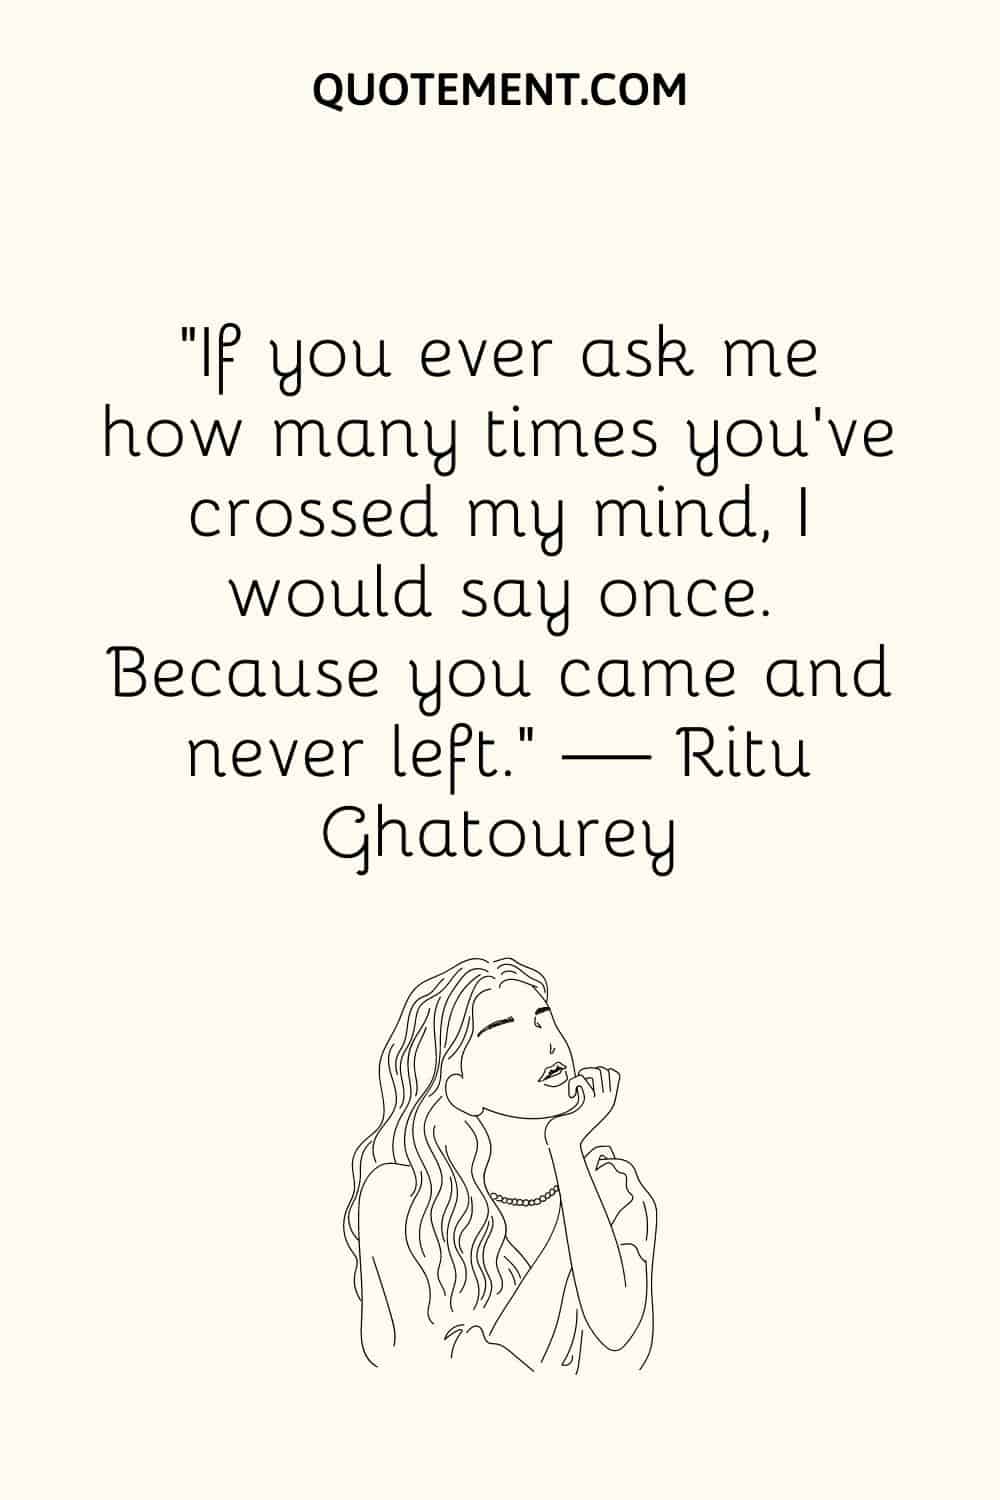 “If you ever ask me how many times you've crossed my mind, I would say once. Because you came and never left.” — Ritu Ghatourey